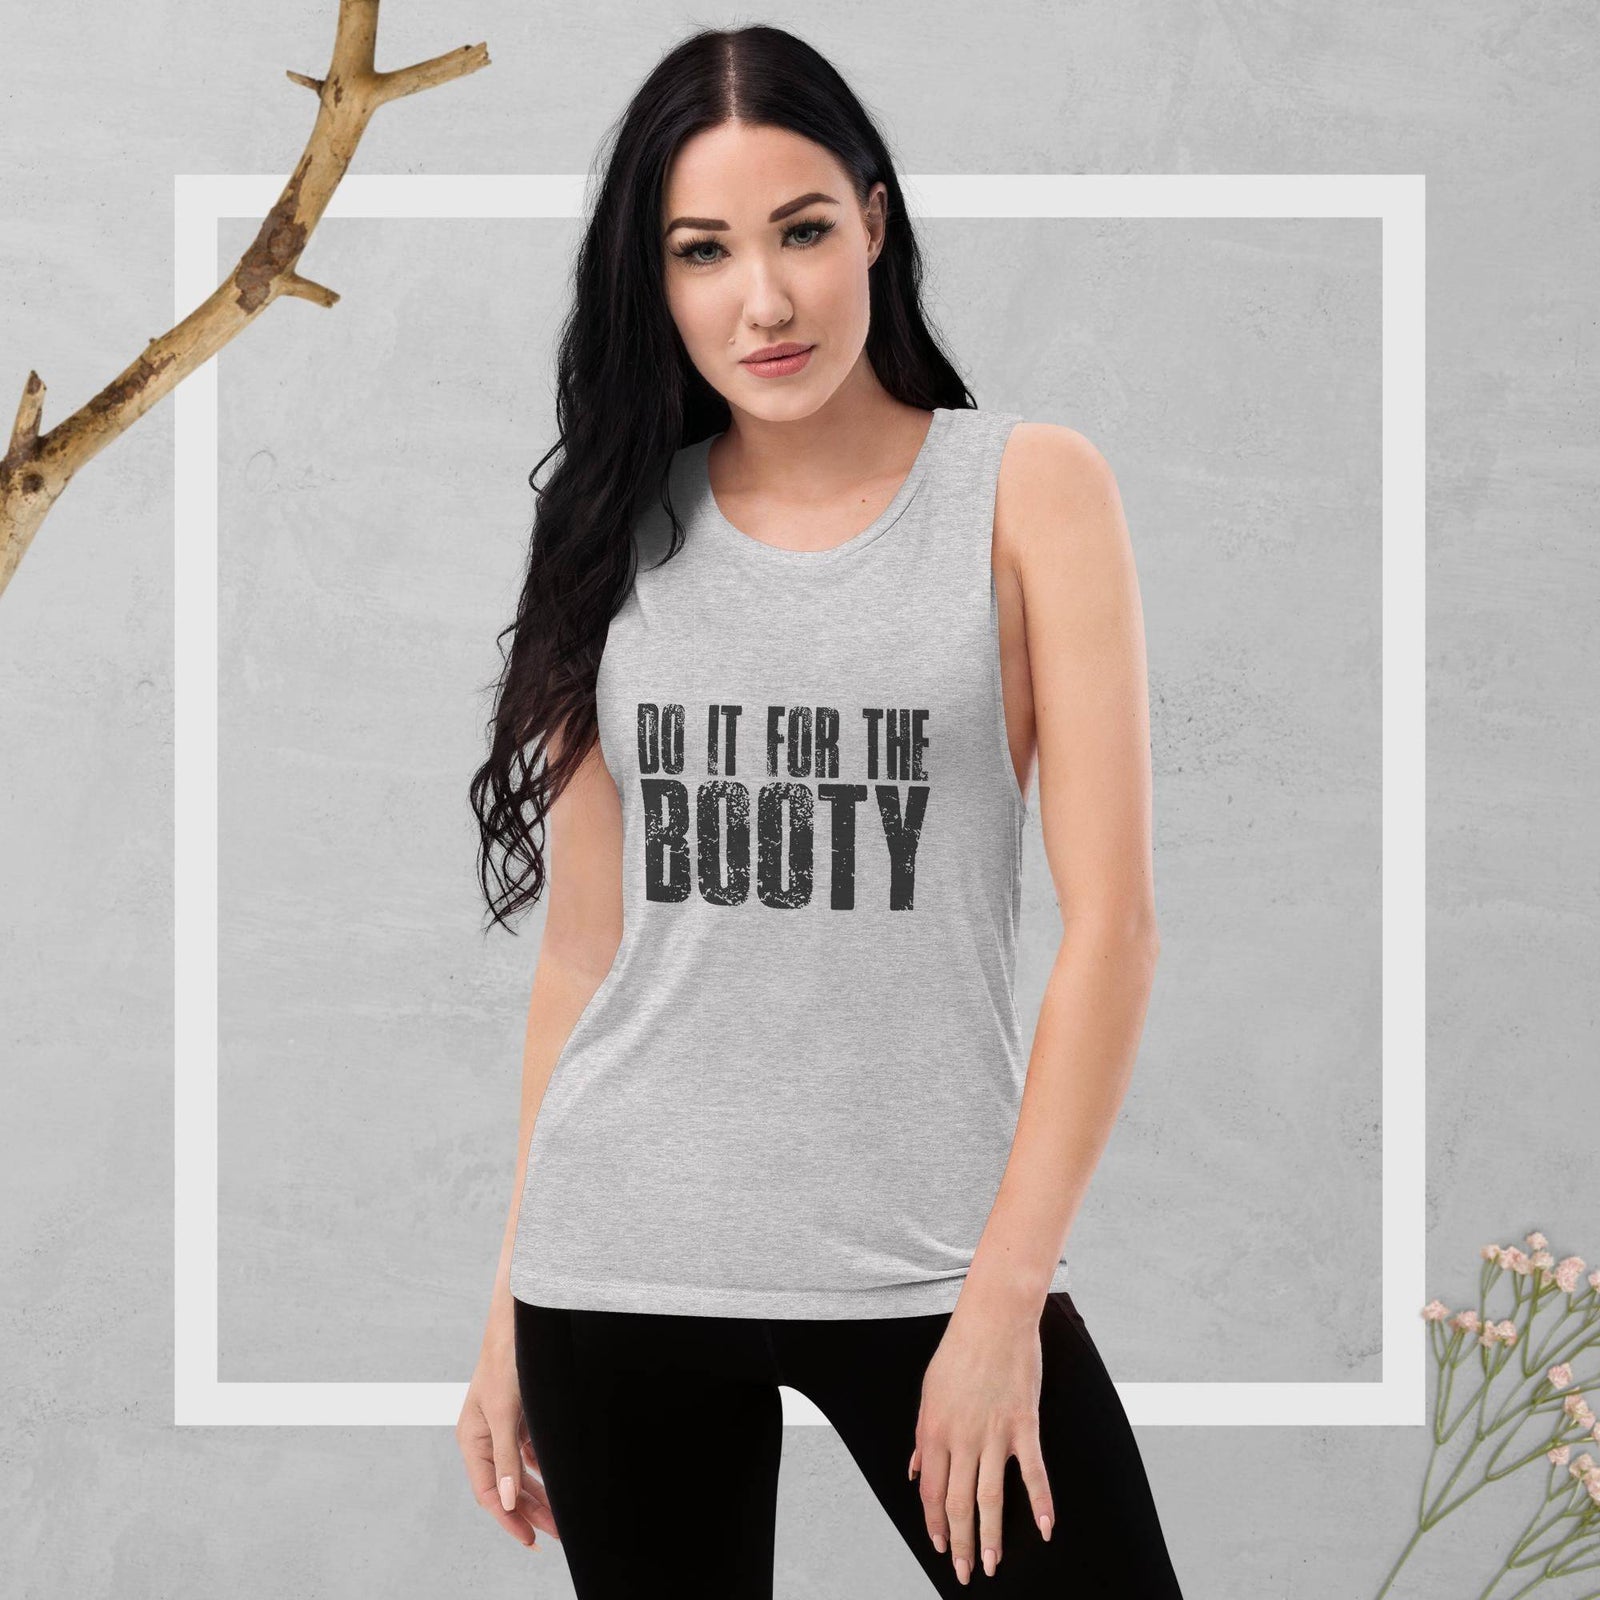 Ladies Muscle Workout Tank Top Australia - Revive Wear     Ladies Muscle Workout Tank. Lightweight & cool Tank Top with extra wide arm holes for a total HITT workout. Shop Tank Tops today.